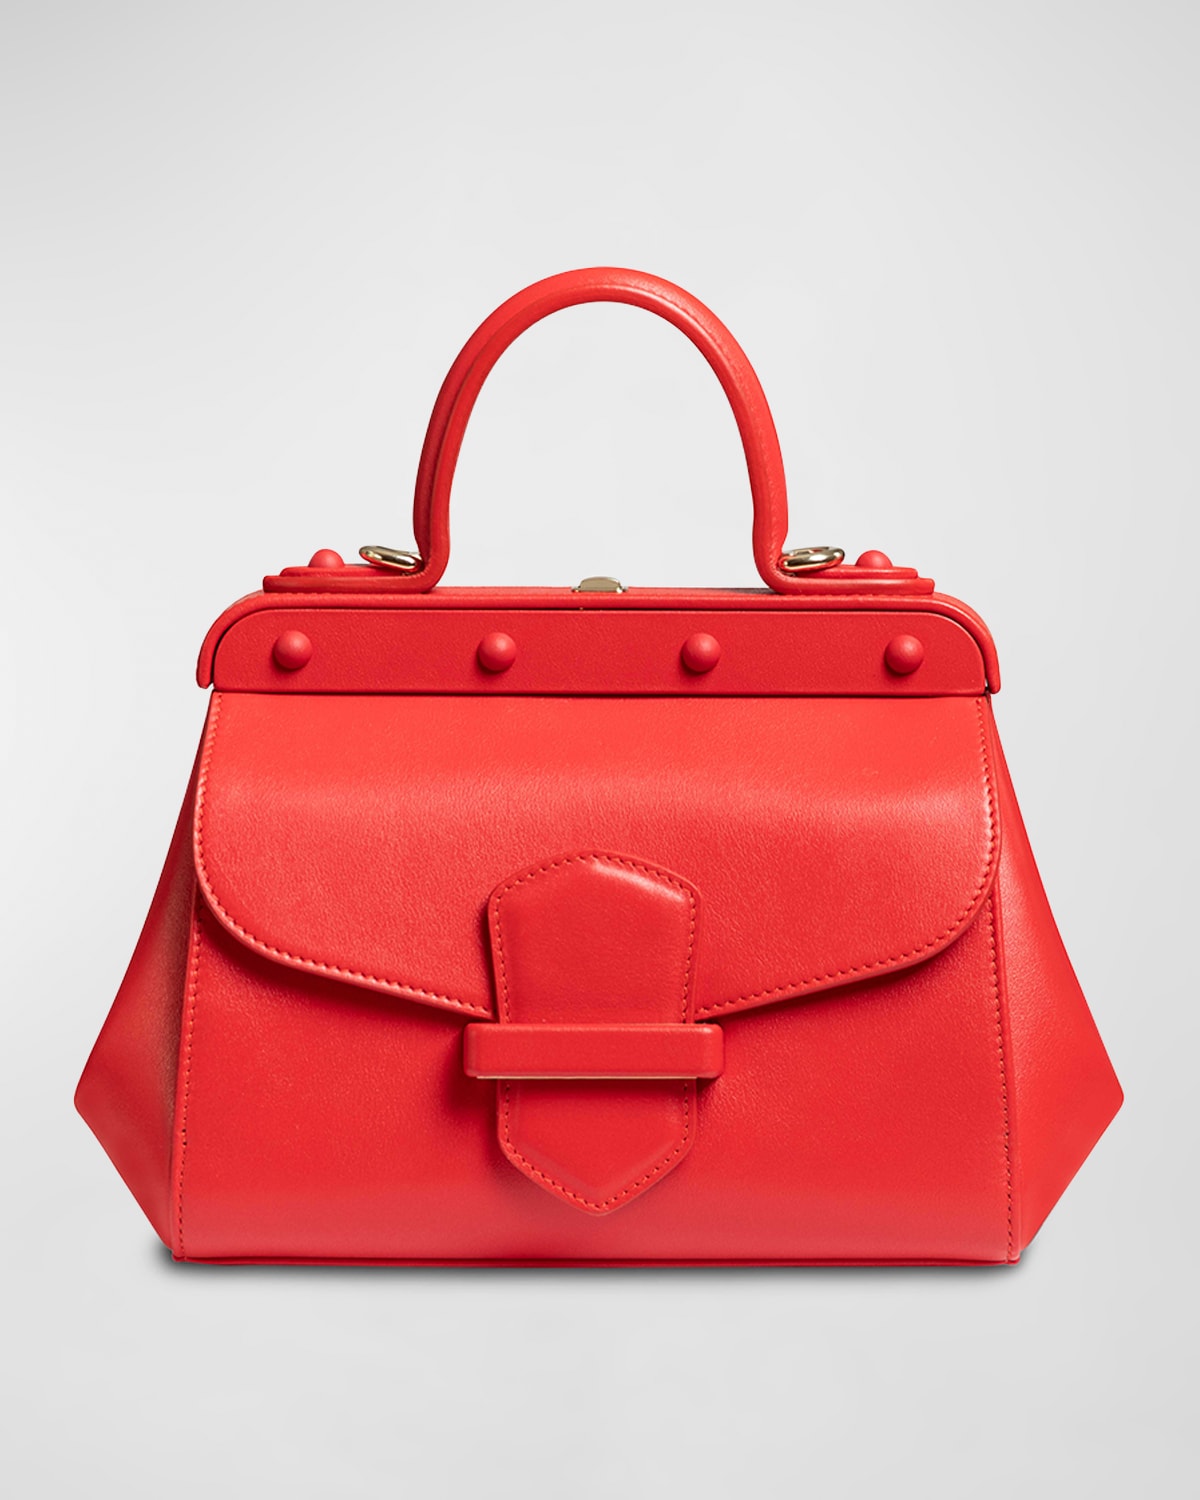 Franzi Margherita Small Leather Top-handle Bag In Passion Red